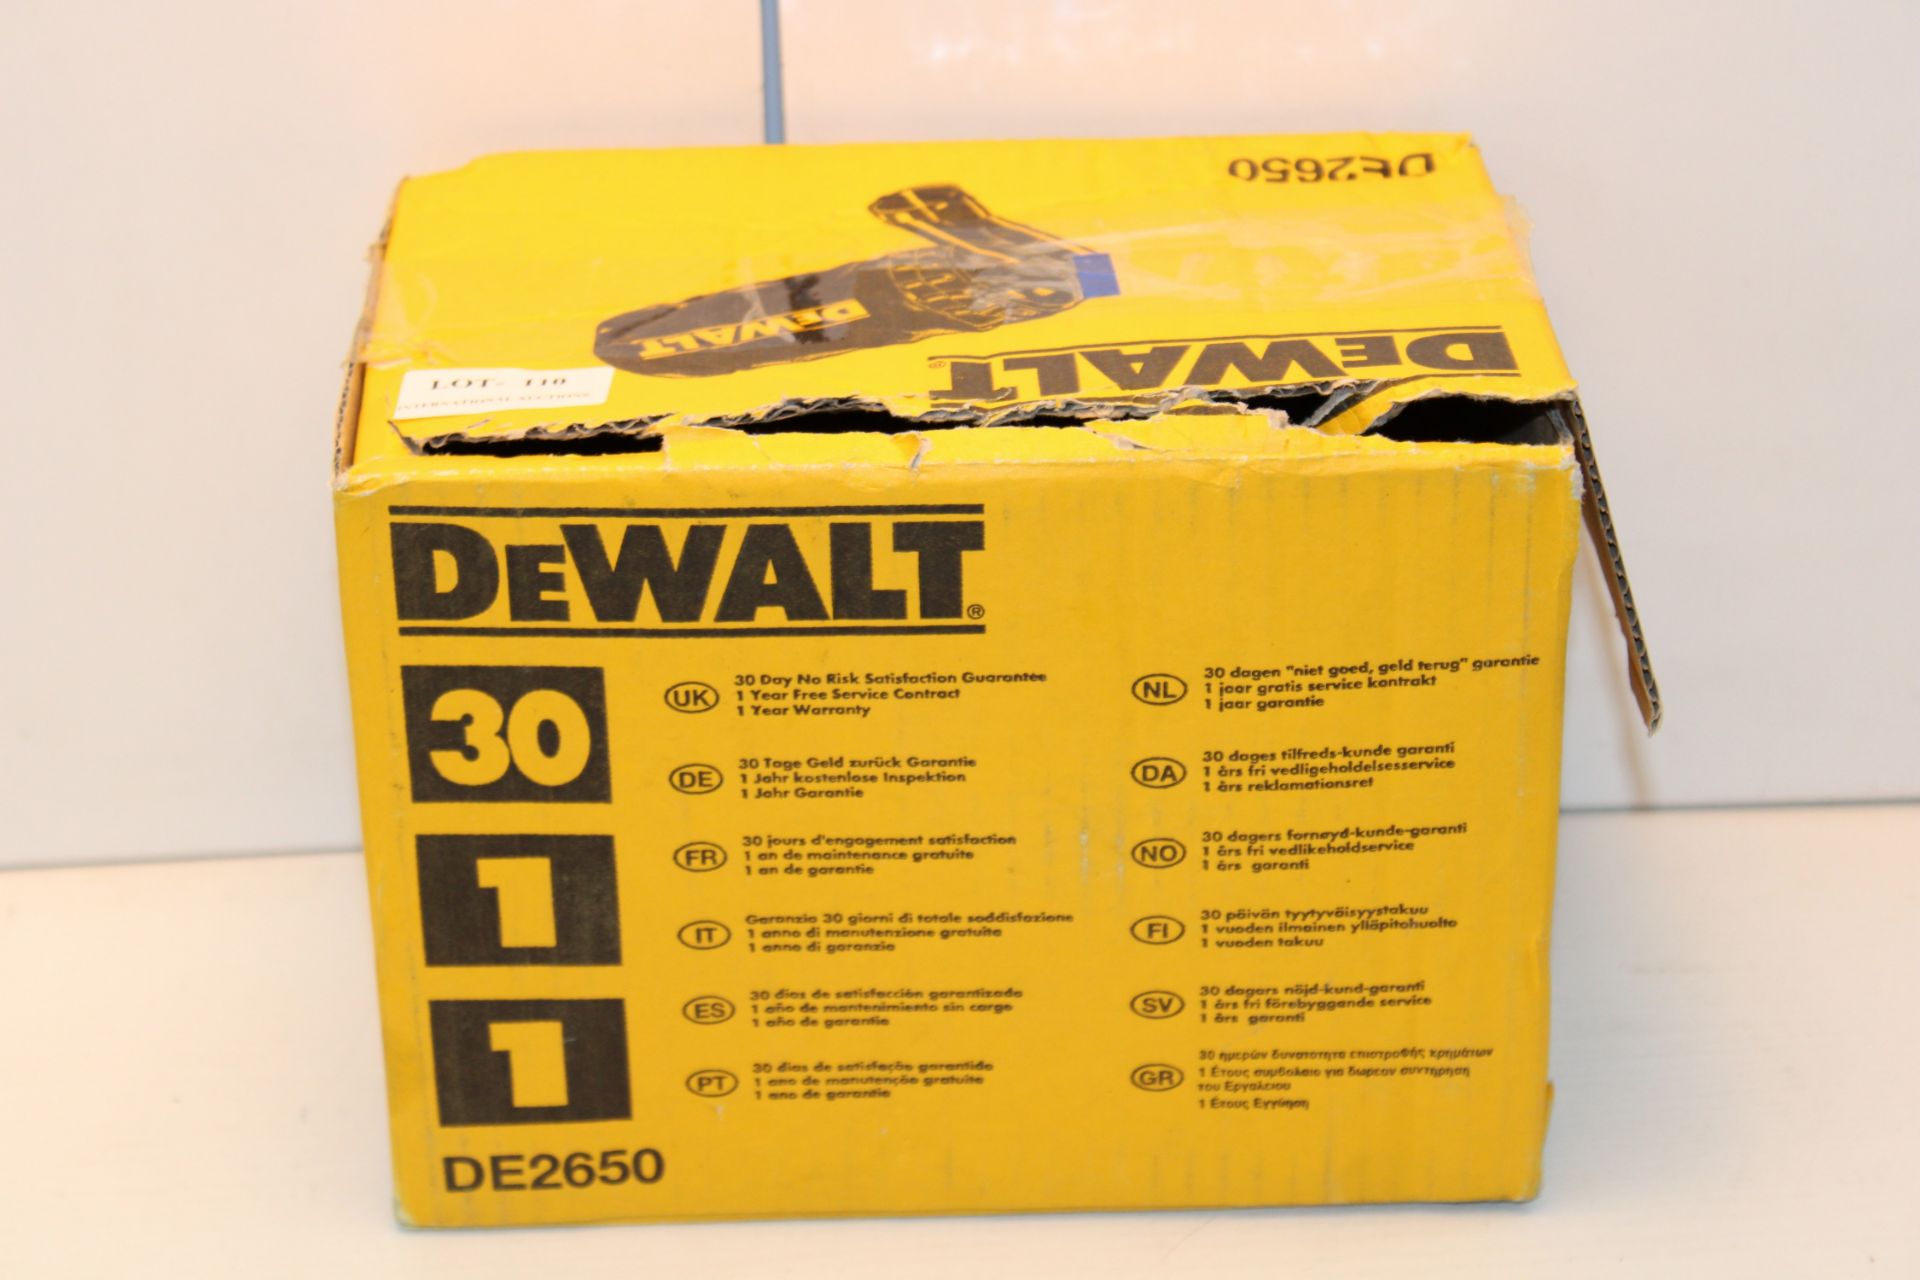 BOXED DEEWALT DE2650 PLANER DUST BAG Condition ReportAppraisal Available on Request- All Items are